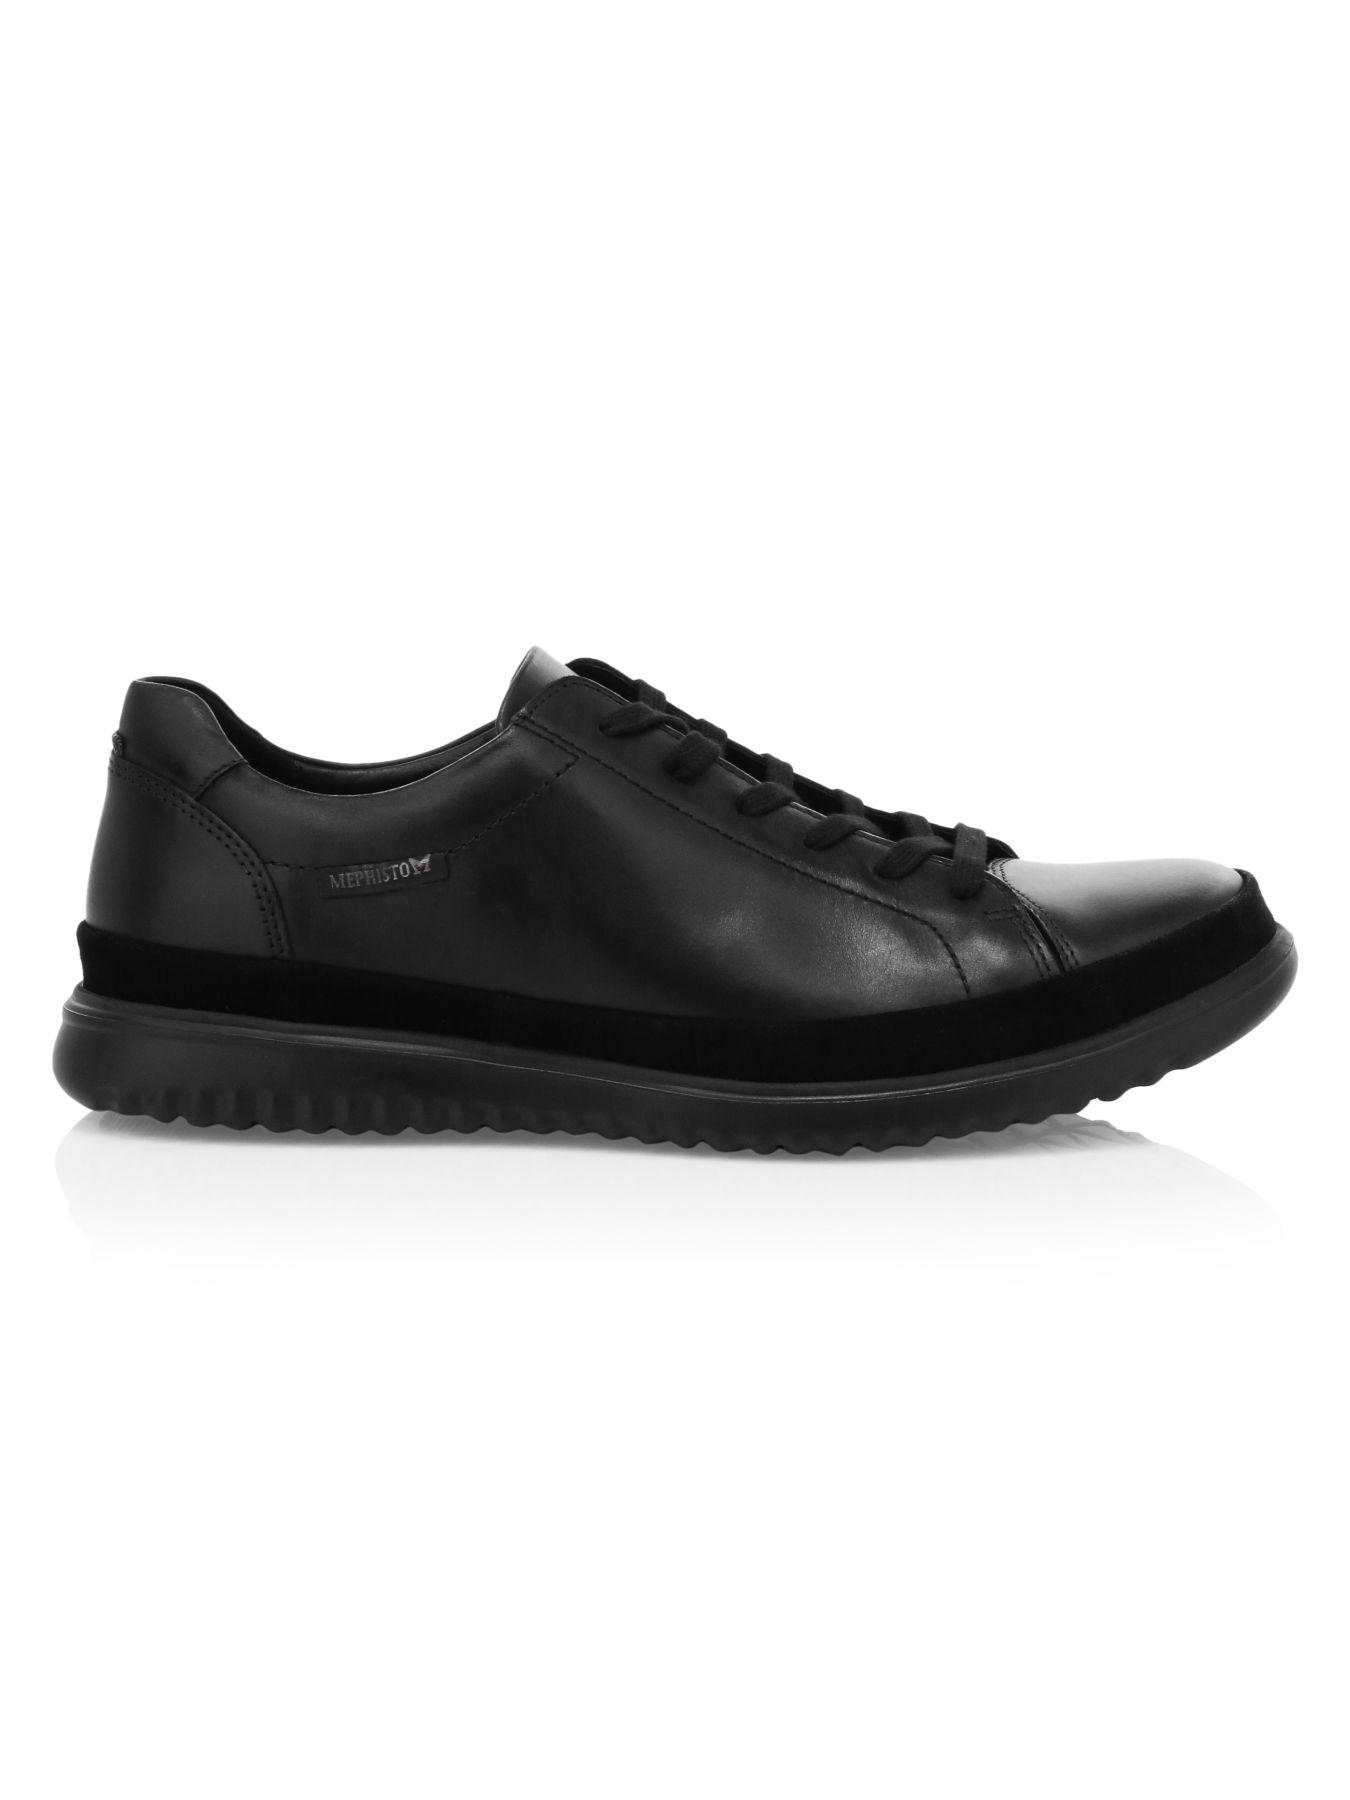 Mephisto Thomas Leather Sneakers in Black for Men - Lyst